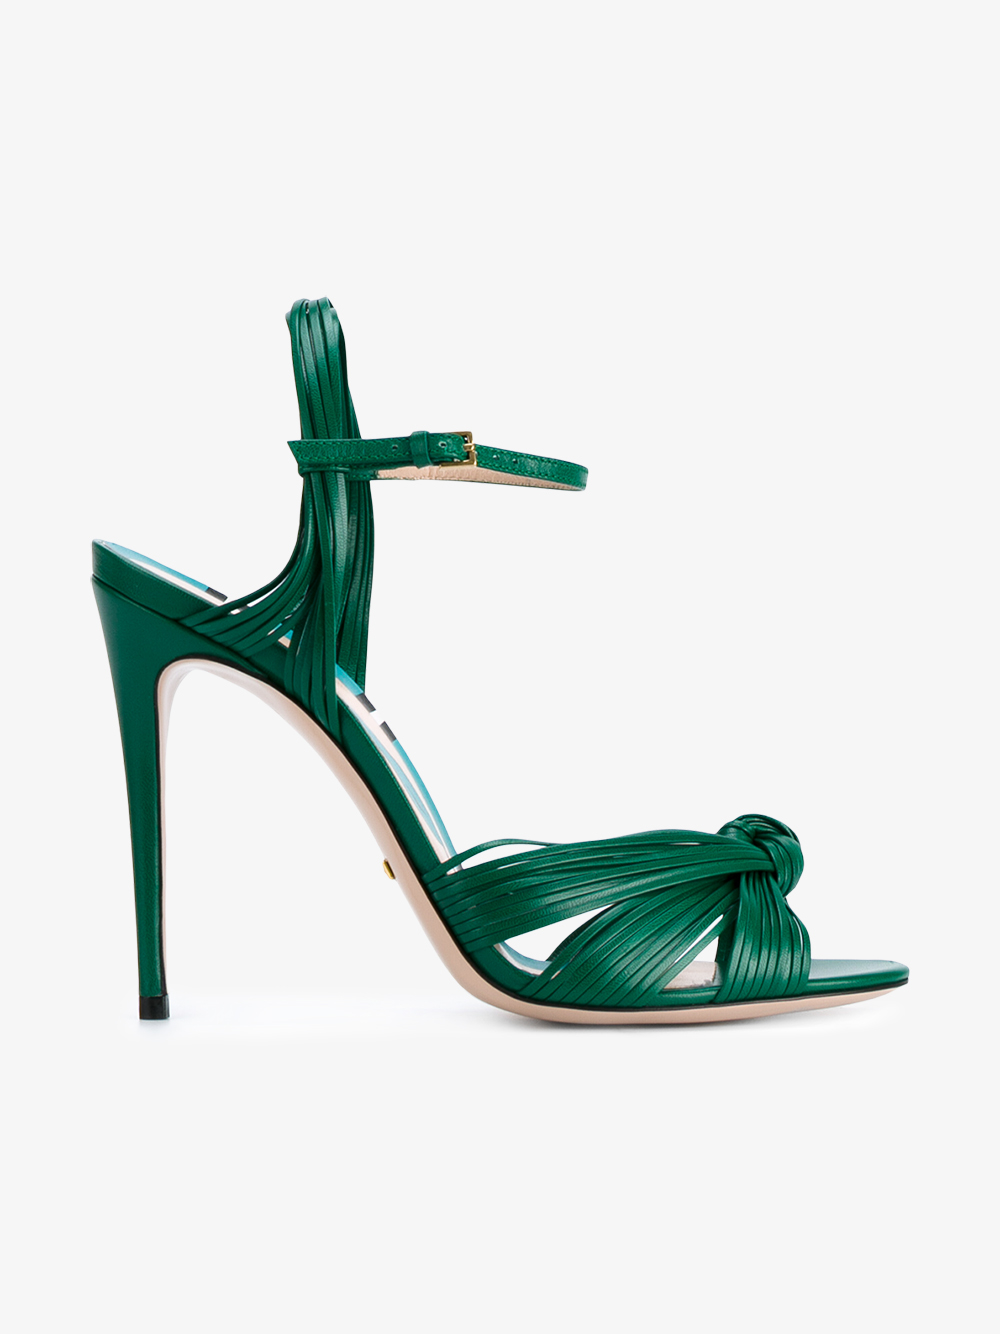 Lyst - Gucci Strappy Sandals in Green